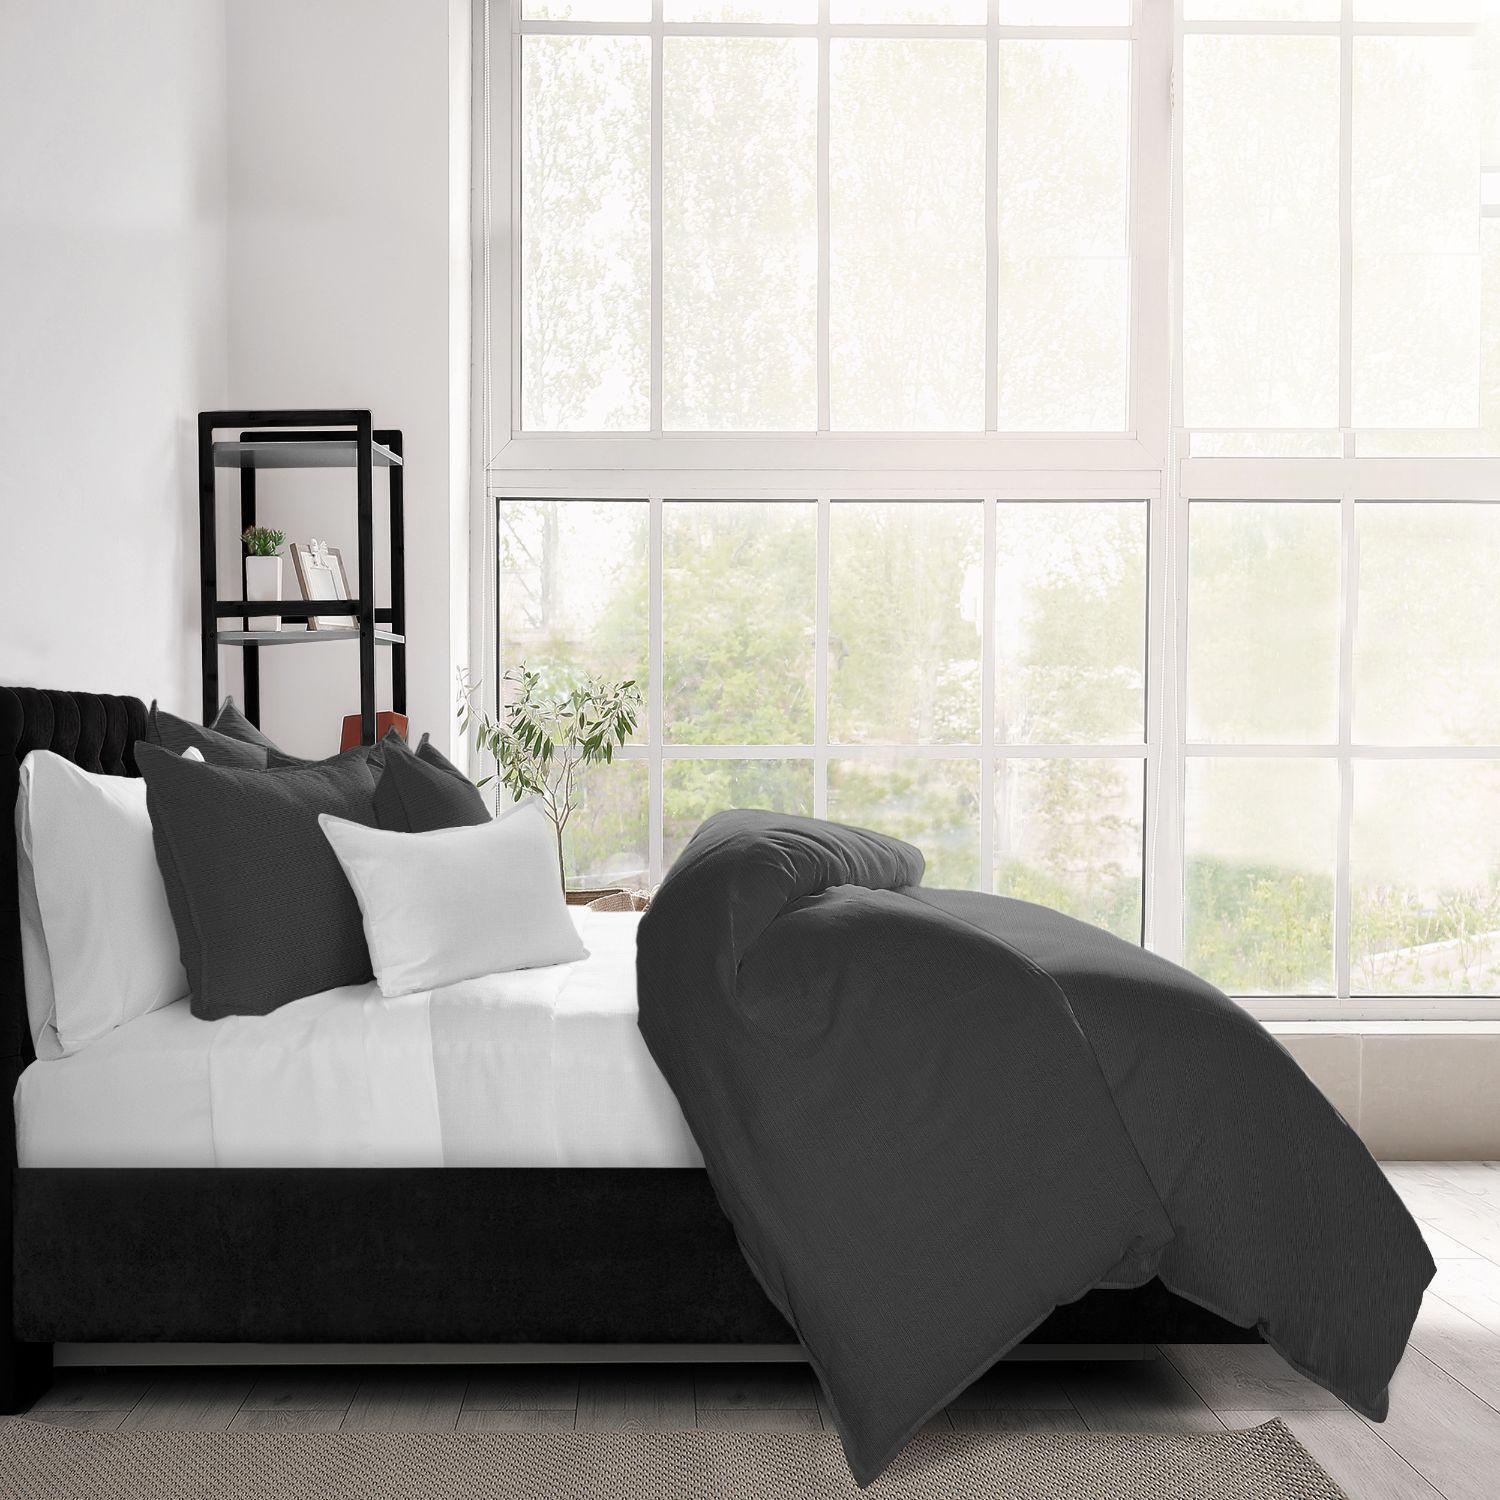 Set of 2 Charcoal Black Solid Comforter with Pillow Sham - Twin Size alternate image